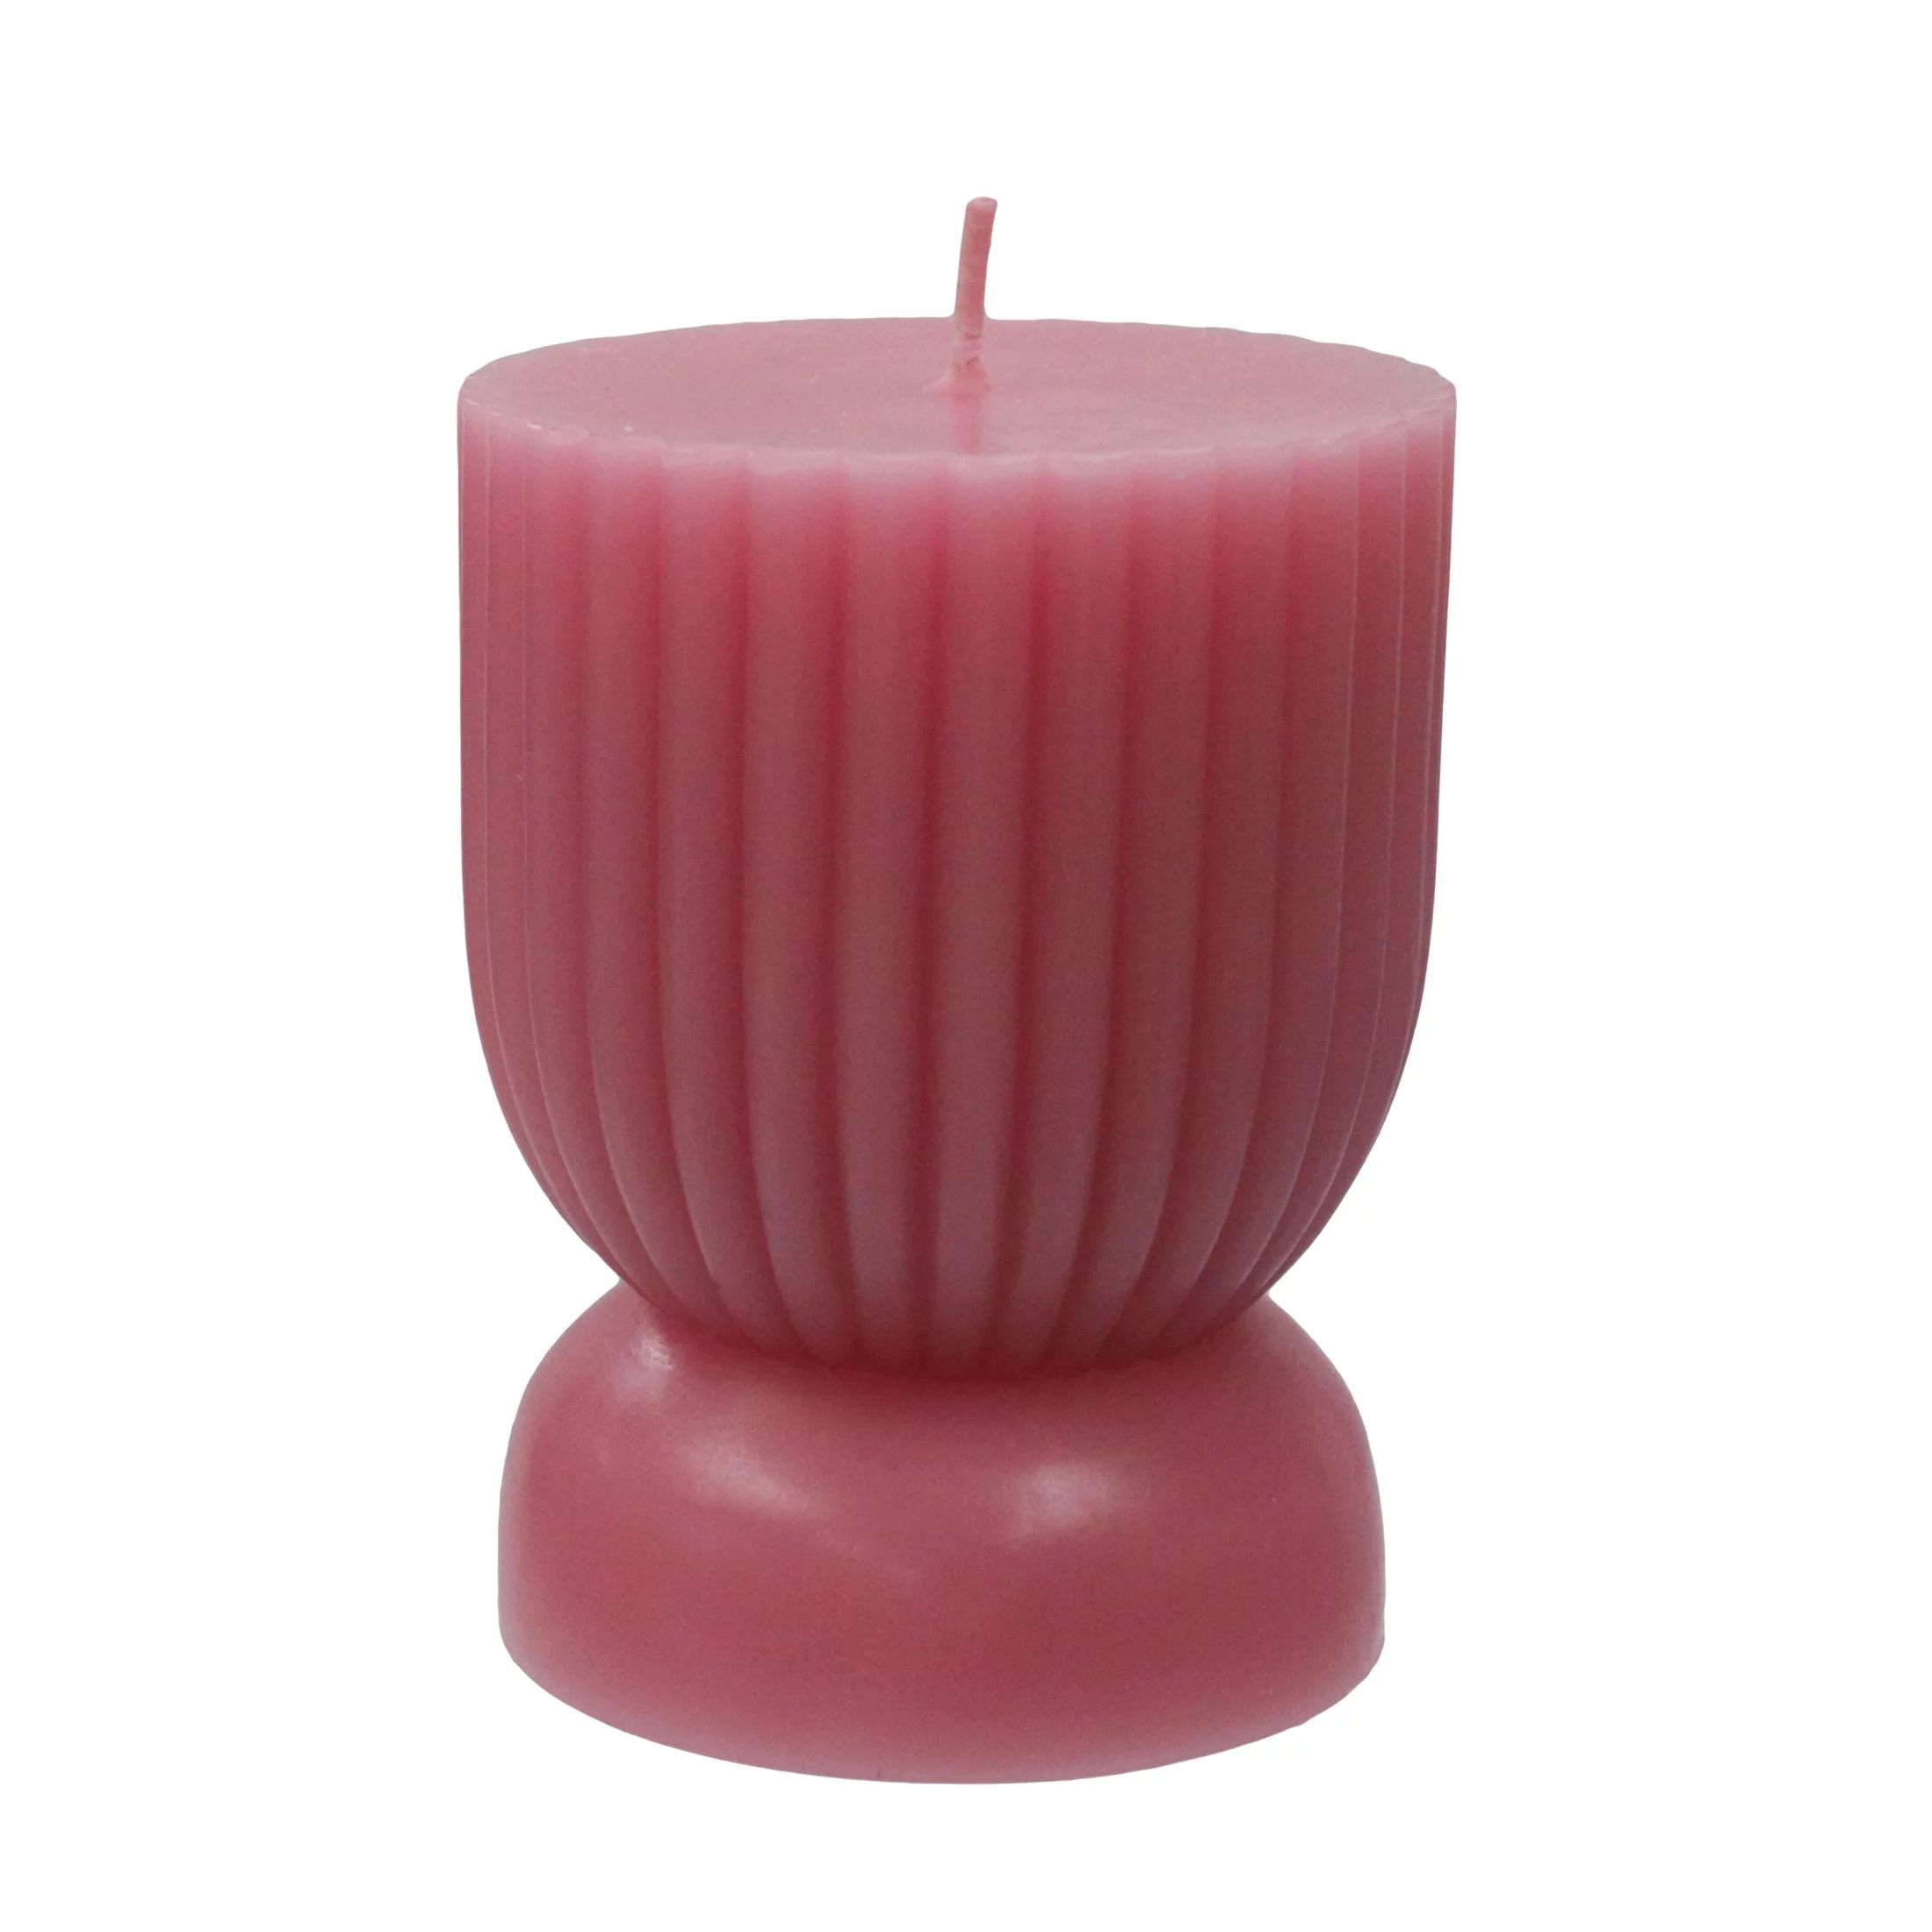 Better Homes & Gardens Unscented Ribbed Pillar Candle, 3x4 inches, Pink | Walmart (US)